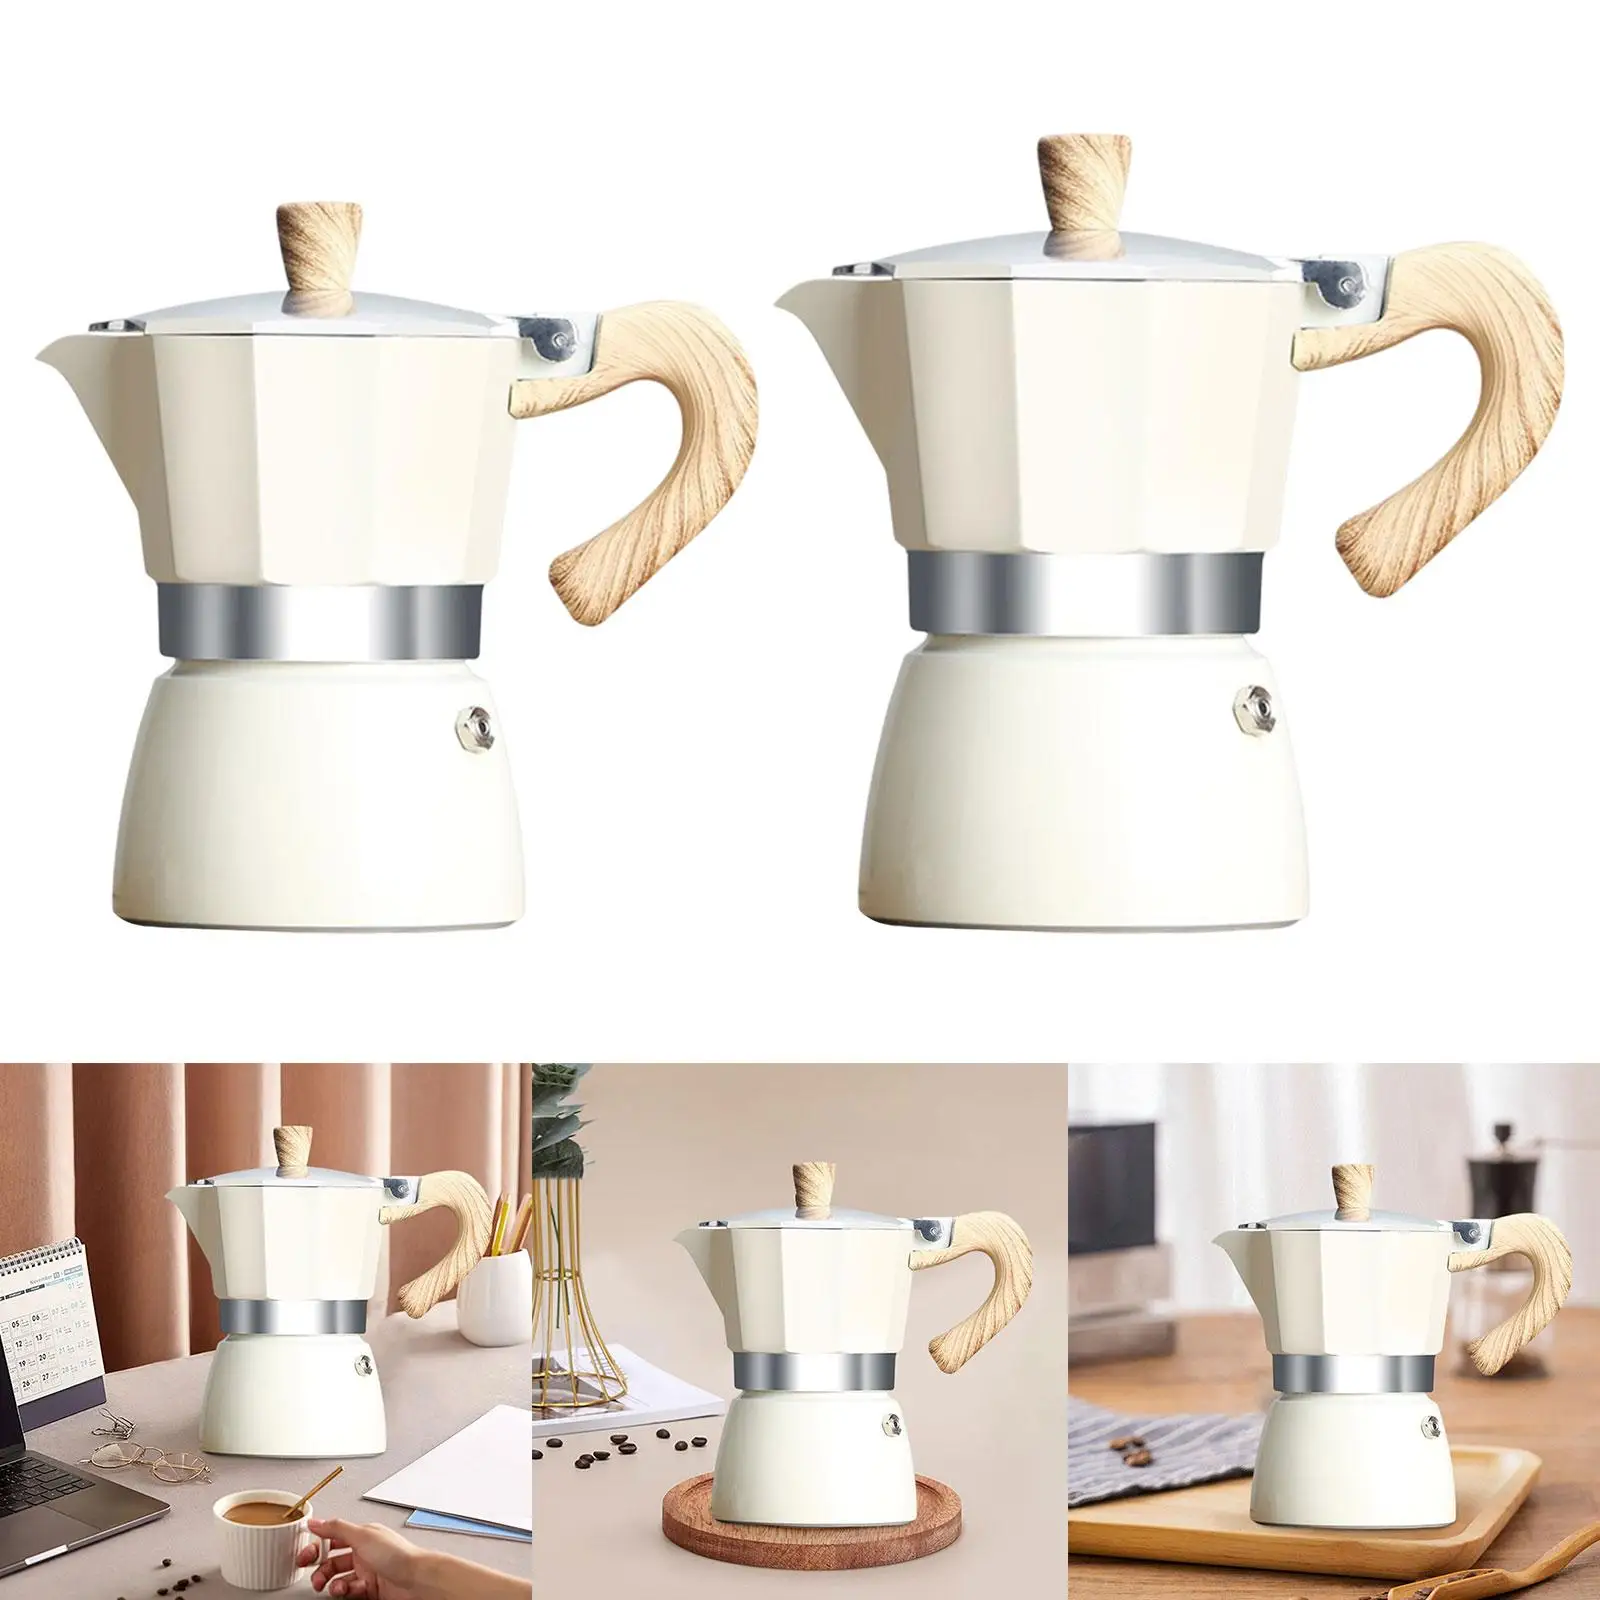 Espresso Maker Pot Lightweight Kitchen Tools Barista Accessories Coffee Maker Pot for Kitchen Home Office Travel Outdoor Camping